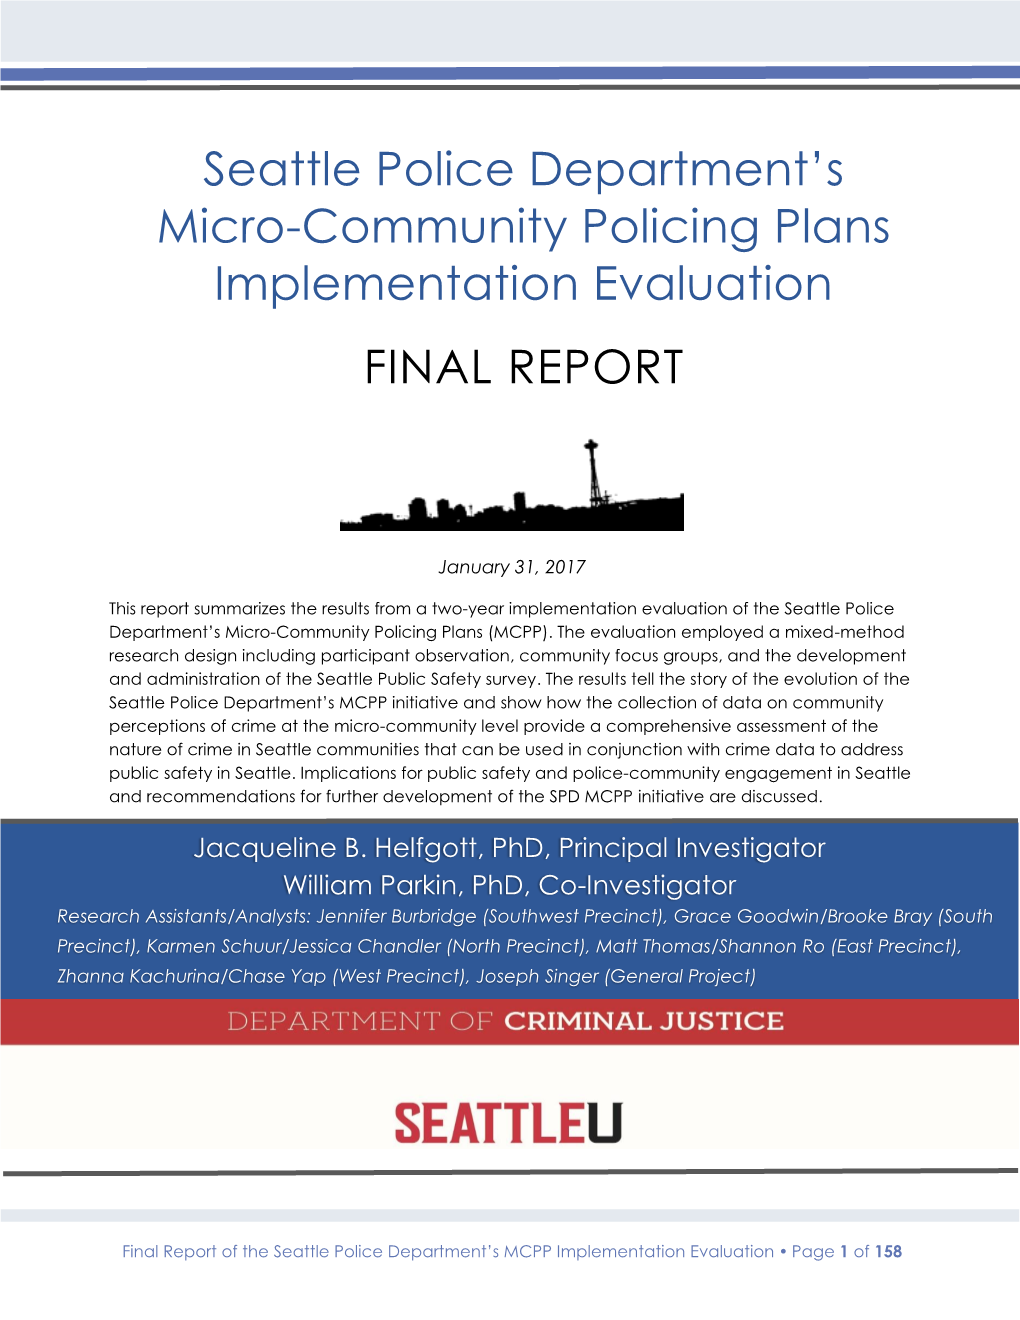 Seattle Police Department's Micro-Community Policing Plans